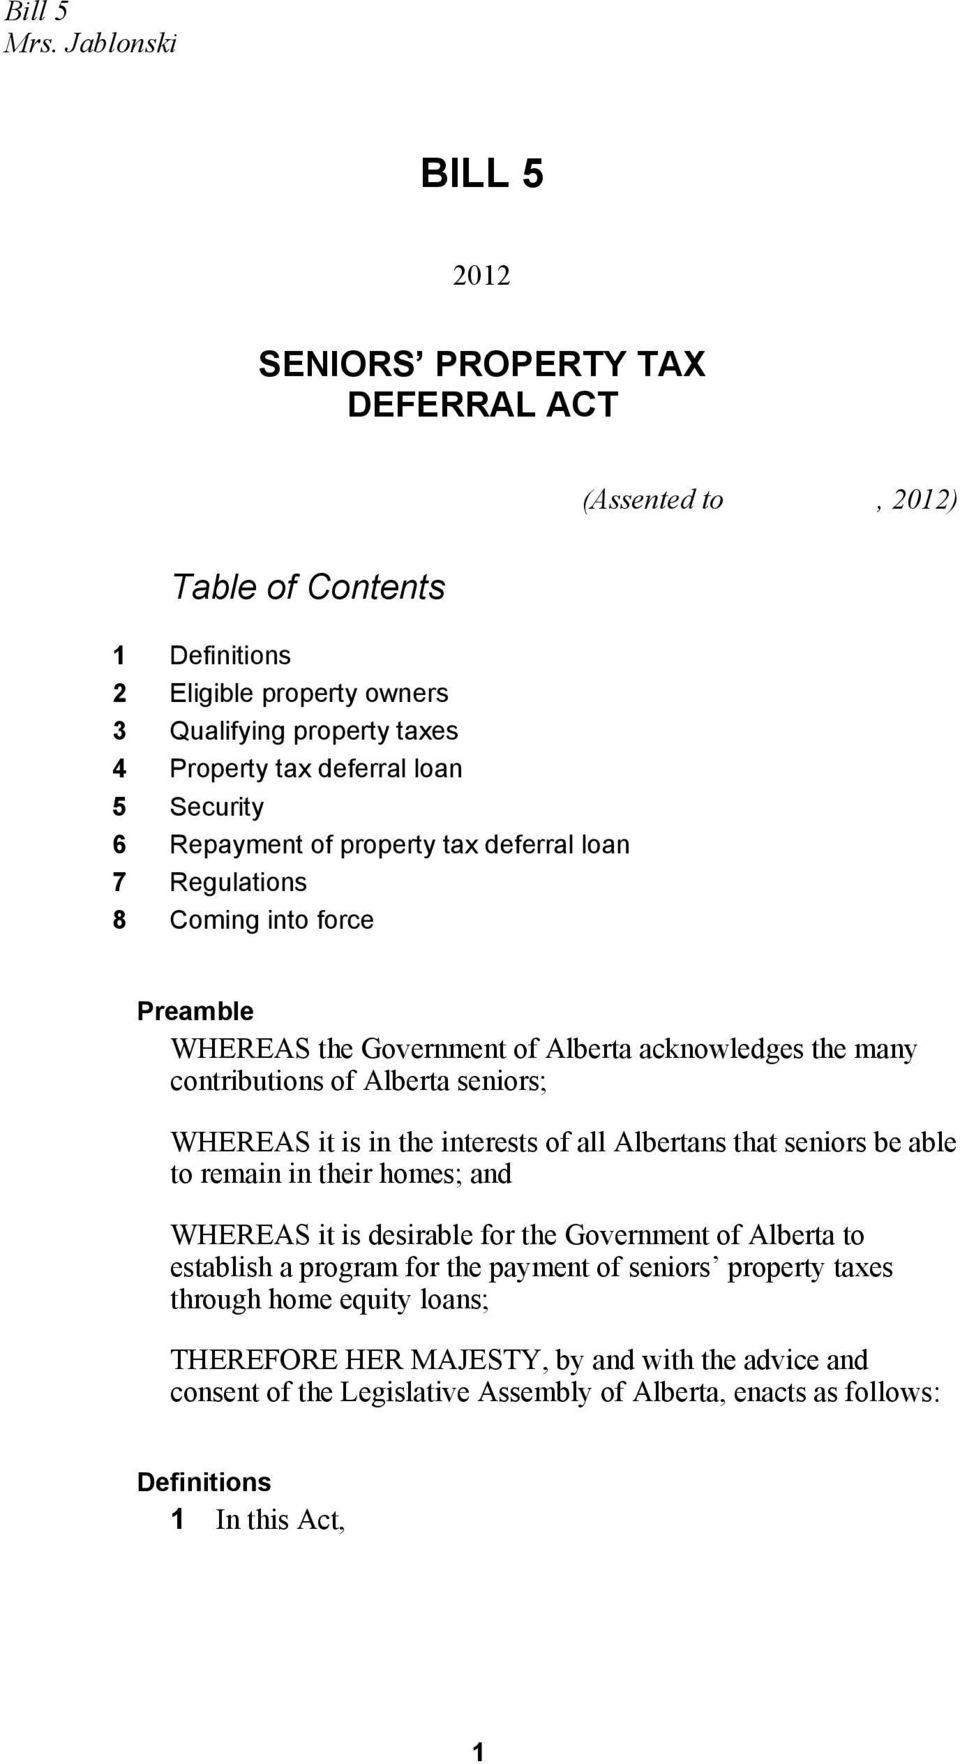 Security 6 Repayment of property tax deferral loan 7 Regulations 8 Coming into force Preamble WHEREAS the Government of Alberta acknowledges the many contributions of Alberta seniors; WHEREAS it